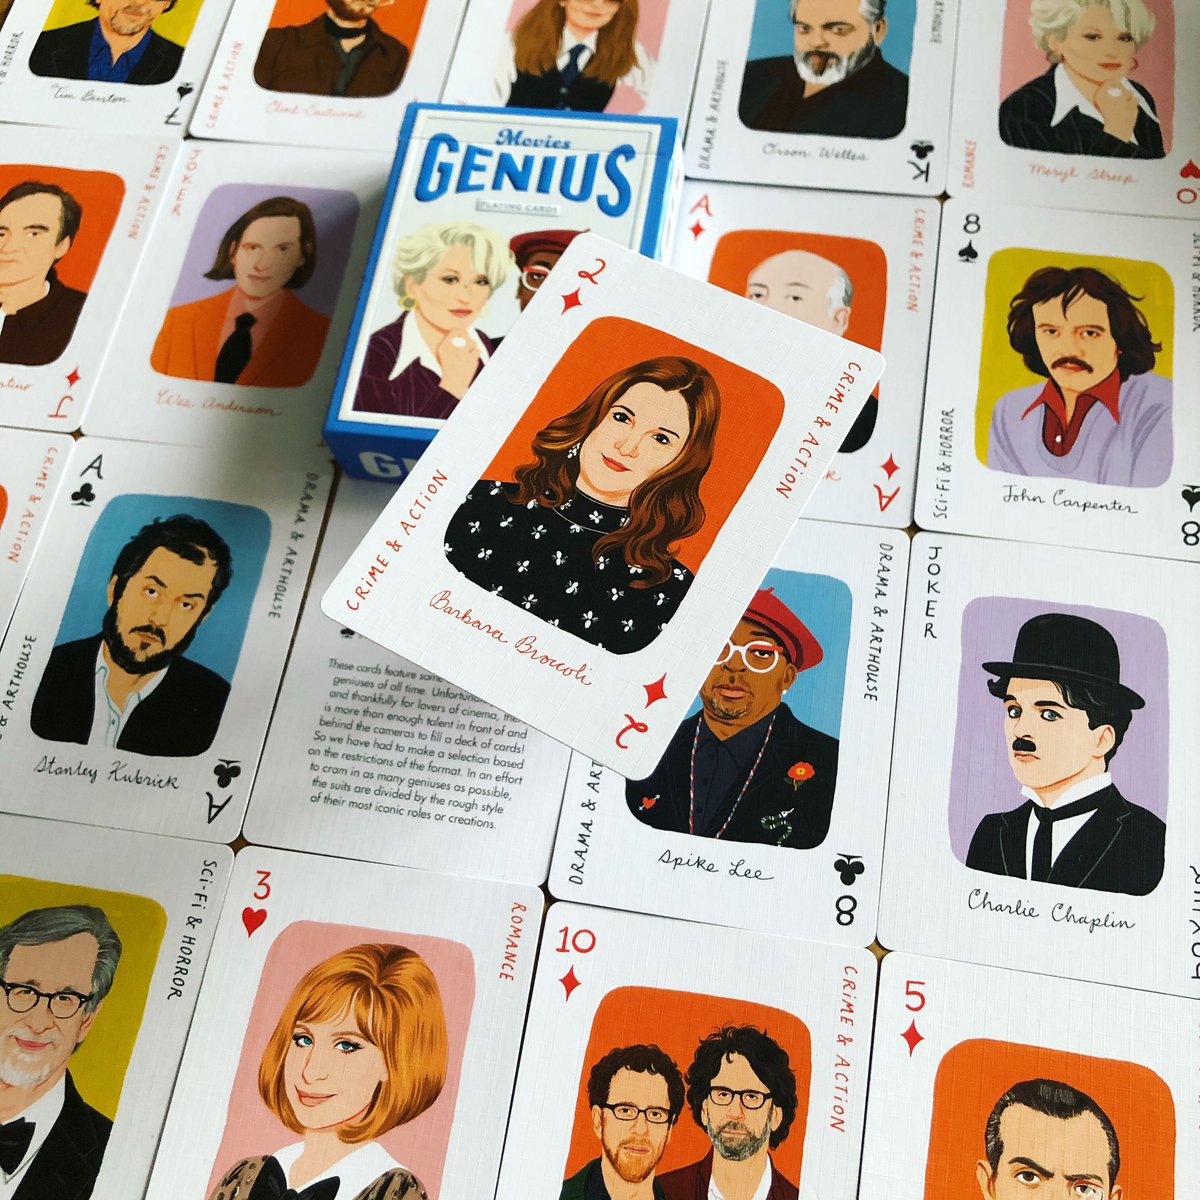 When you afternoon game of Movies Genius playing cards comes with added Broccoli - glad to see one of the driving forces behind Bond represented. 

#barbarabroccoli #womeninfilm #producers #directors #creators #movies #playingcards